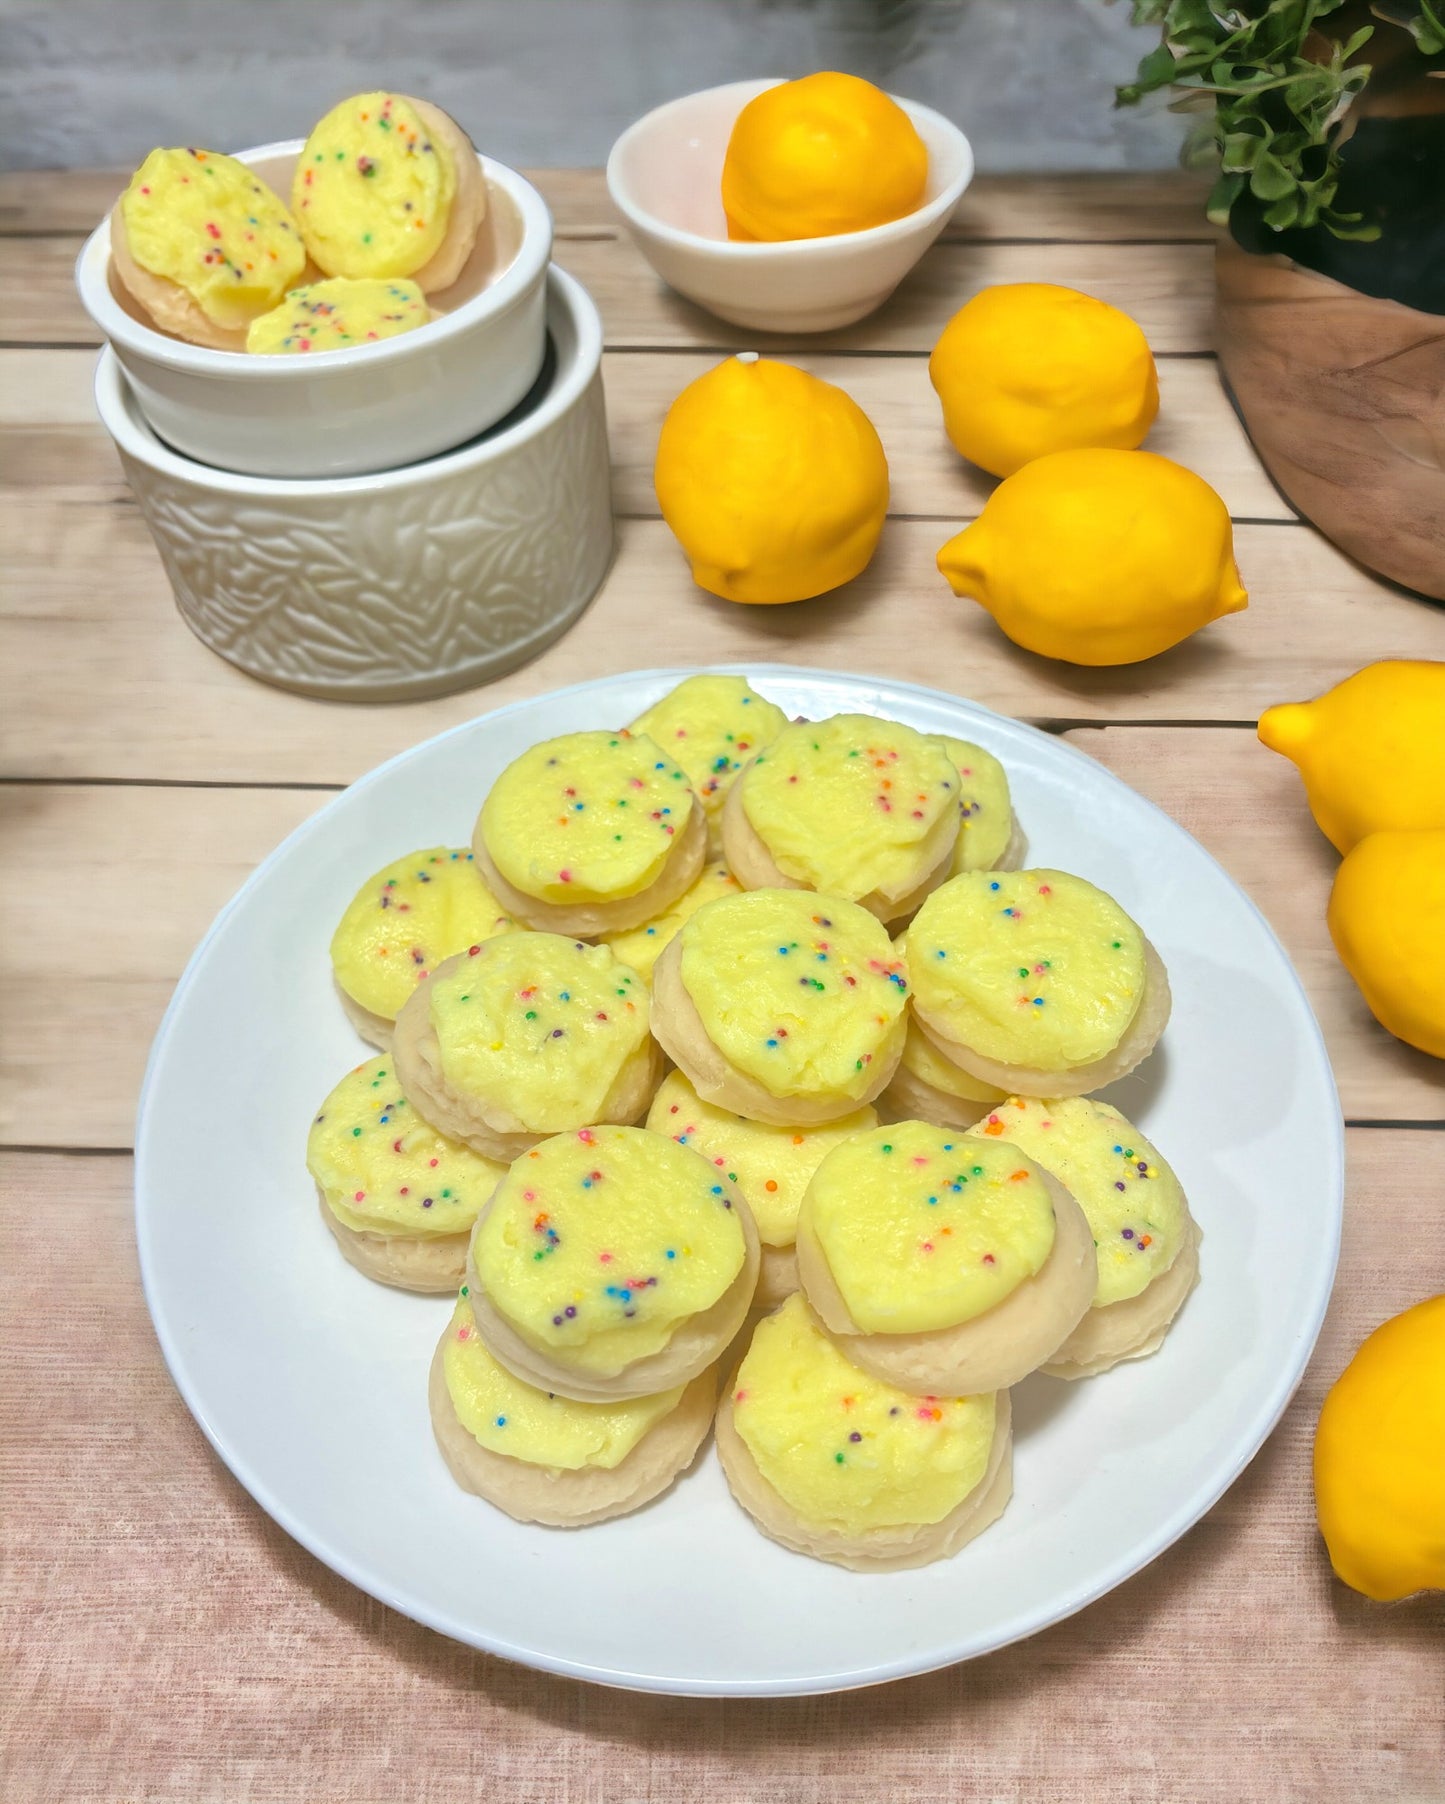 Frosted Lemon Cookie Wax Melts. 5.35 oz. Cookie Wax Melts/Soy Wax Melts/Strongly Scented Wax Melts/9 Cookies